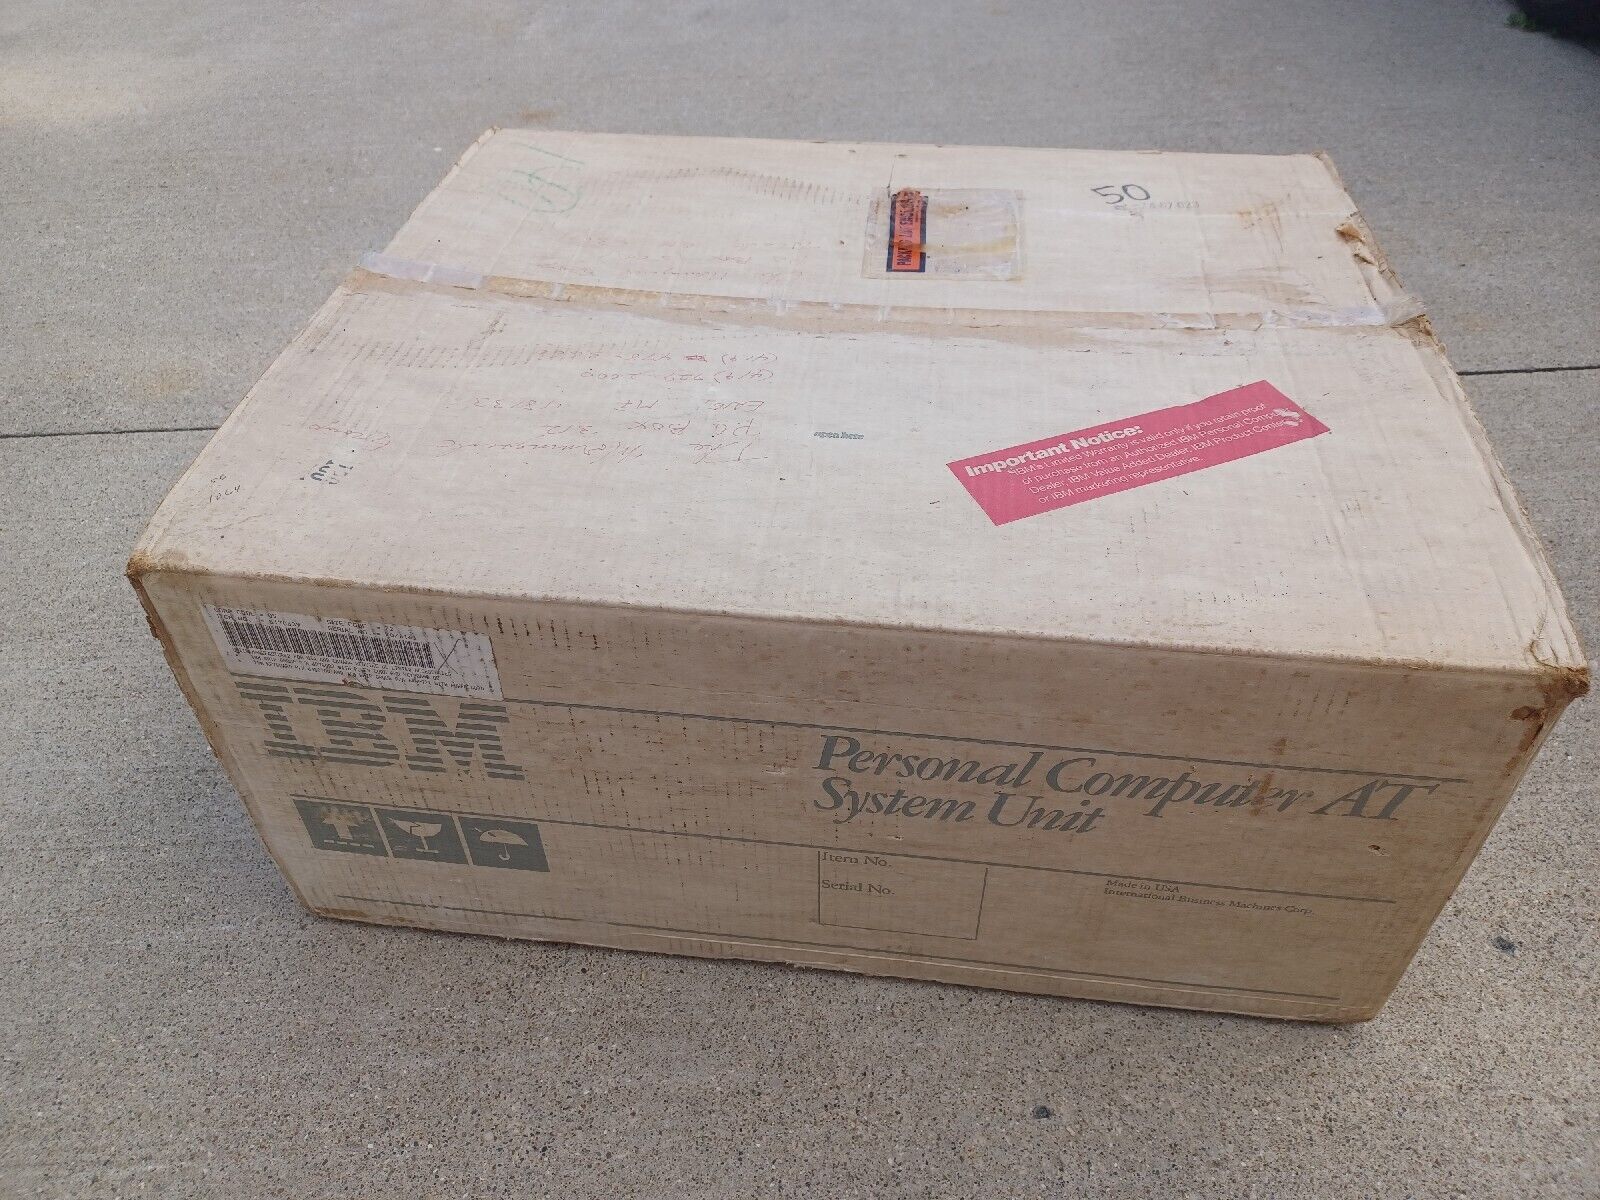 IBM 5170 Personal Computer AT In Original Box Matching Numbers ESTATE SALE FIND